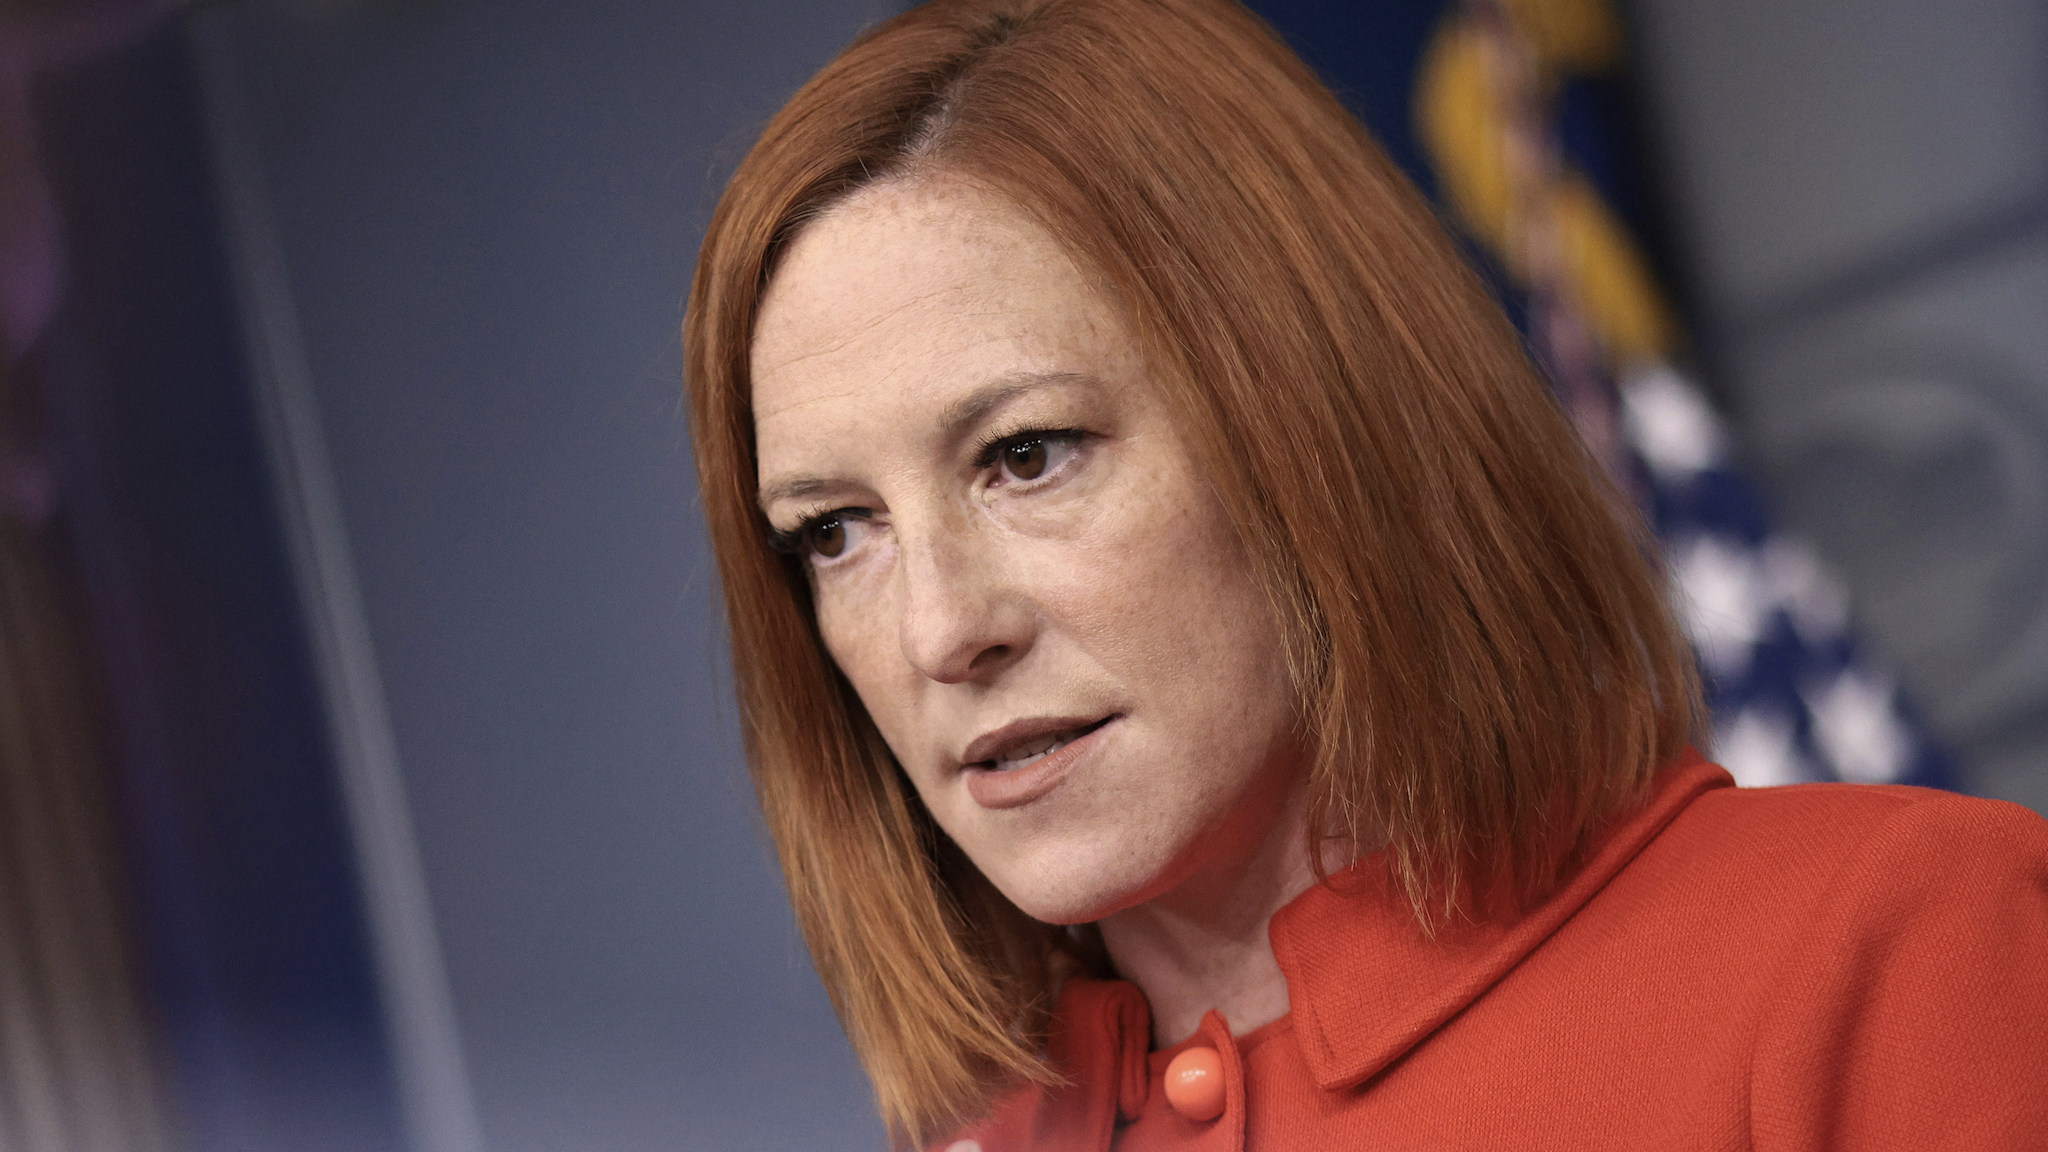 WASHINGTON, DC - SEPTEMBER 15: White House press secretary Jen Psaki answers questions in the White House press briefing room on September 15, 2021 in Washington, DC. Psaki answered a range of questions during the briefing.